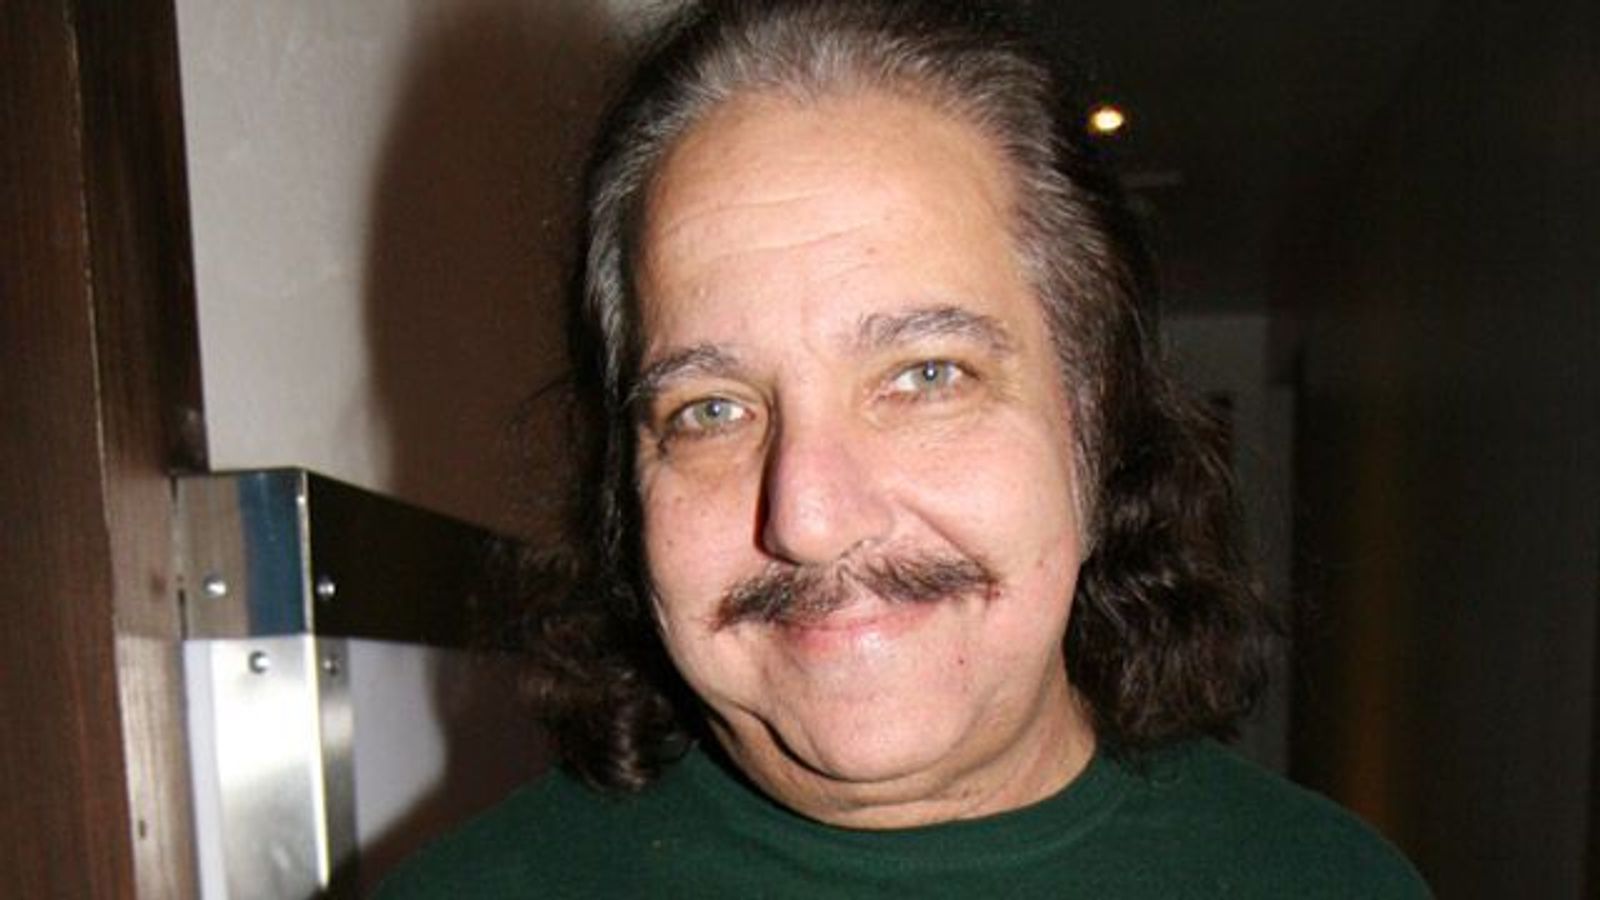 Ron Jeremy on the Mend He Tells 'Inside the Industry'